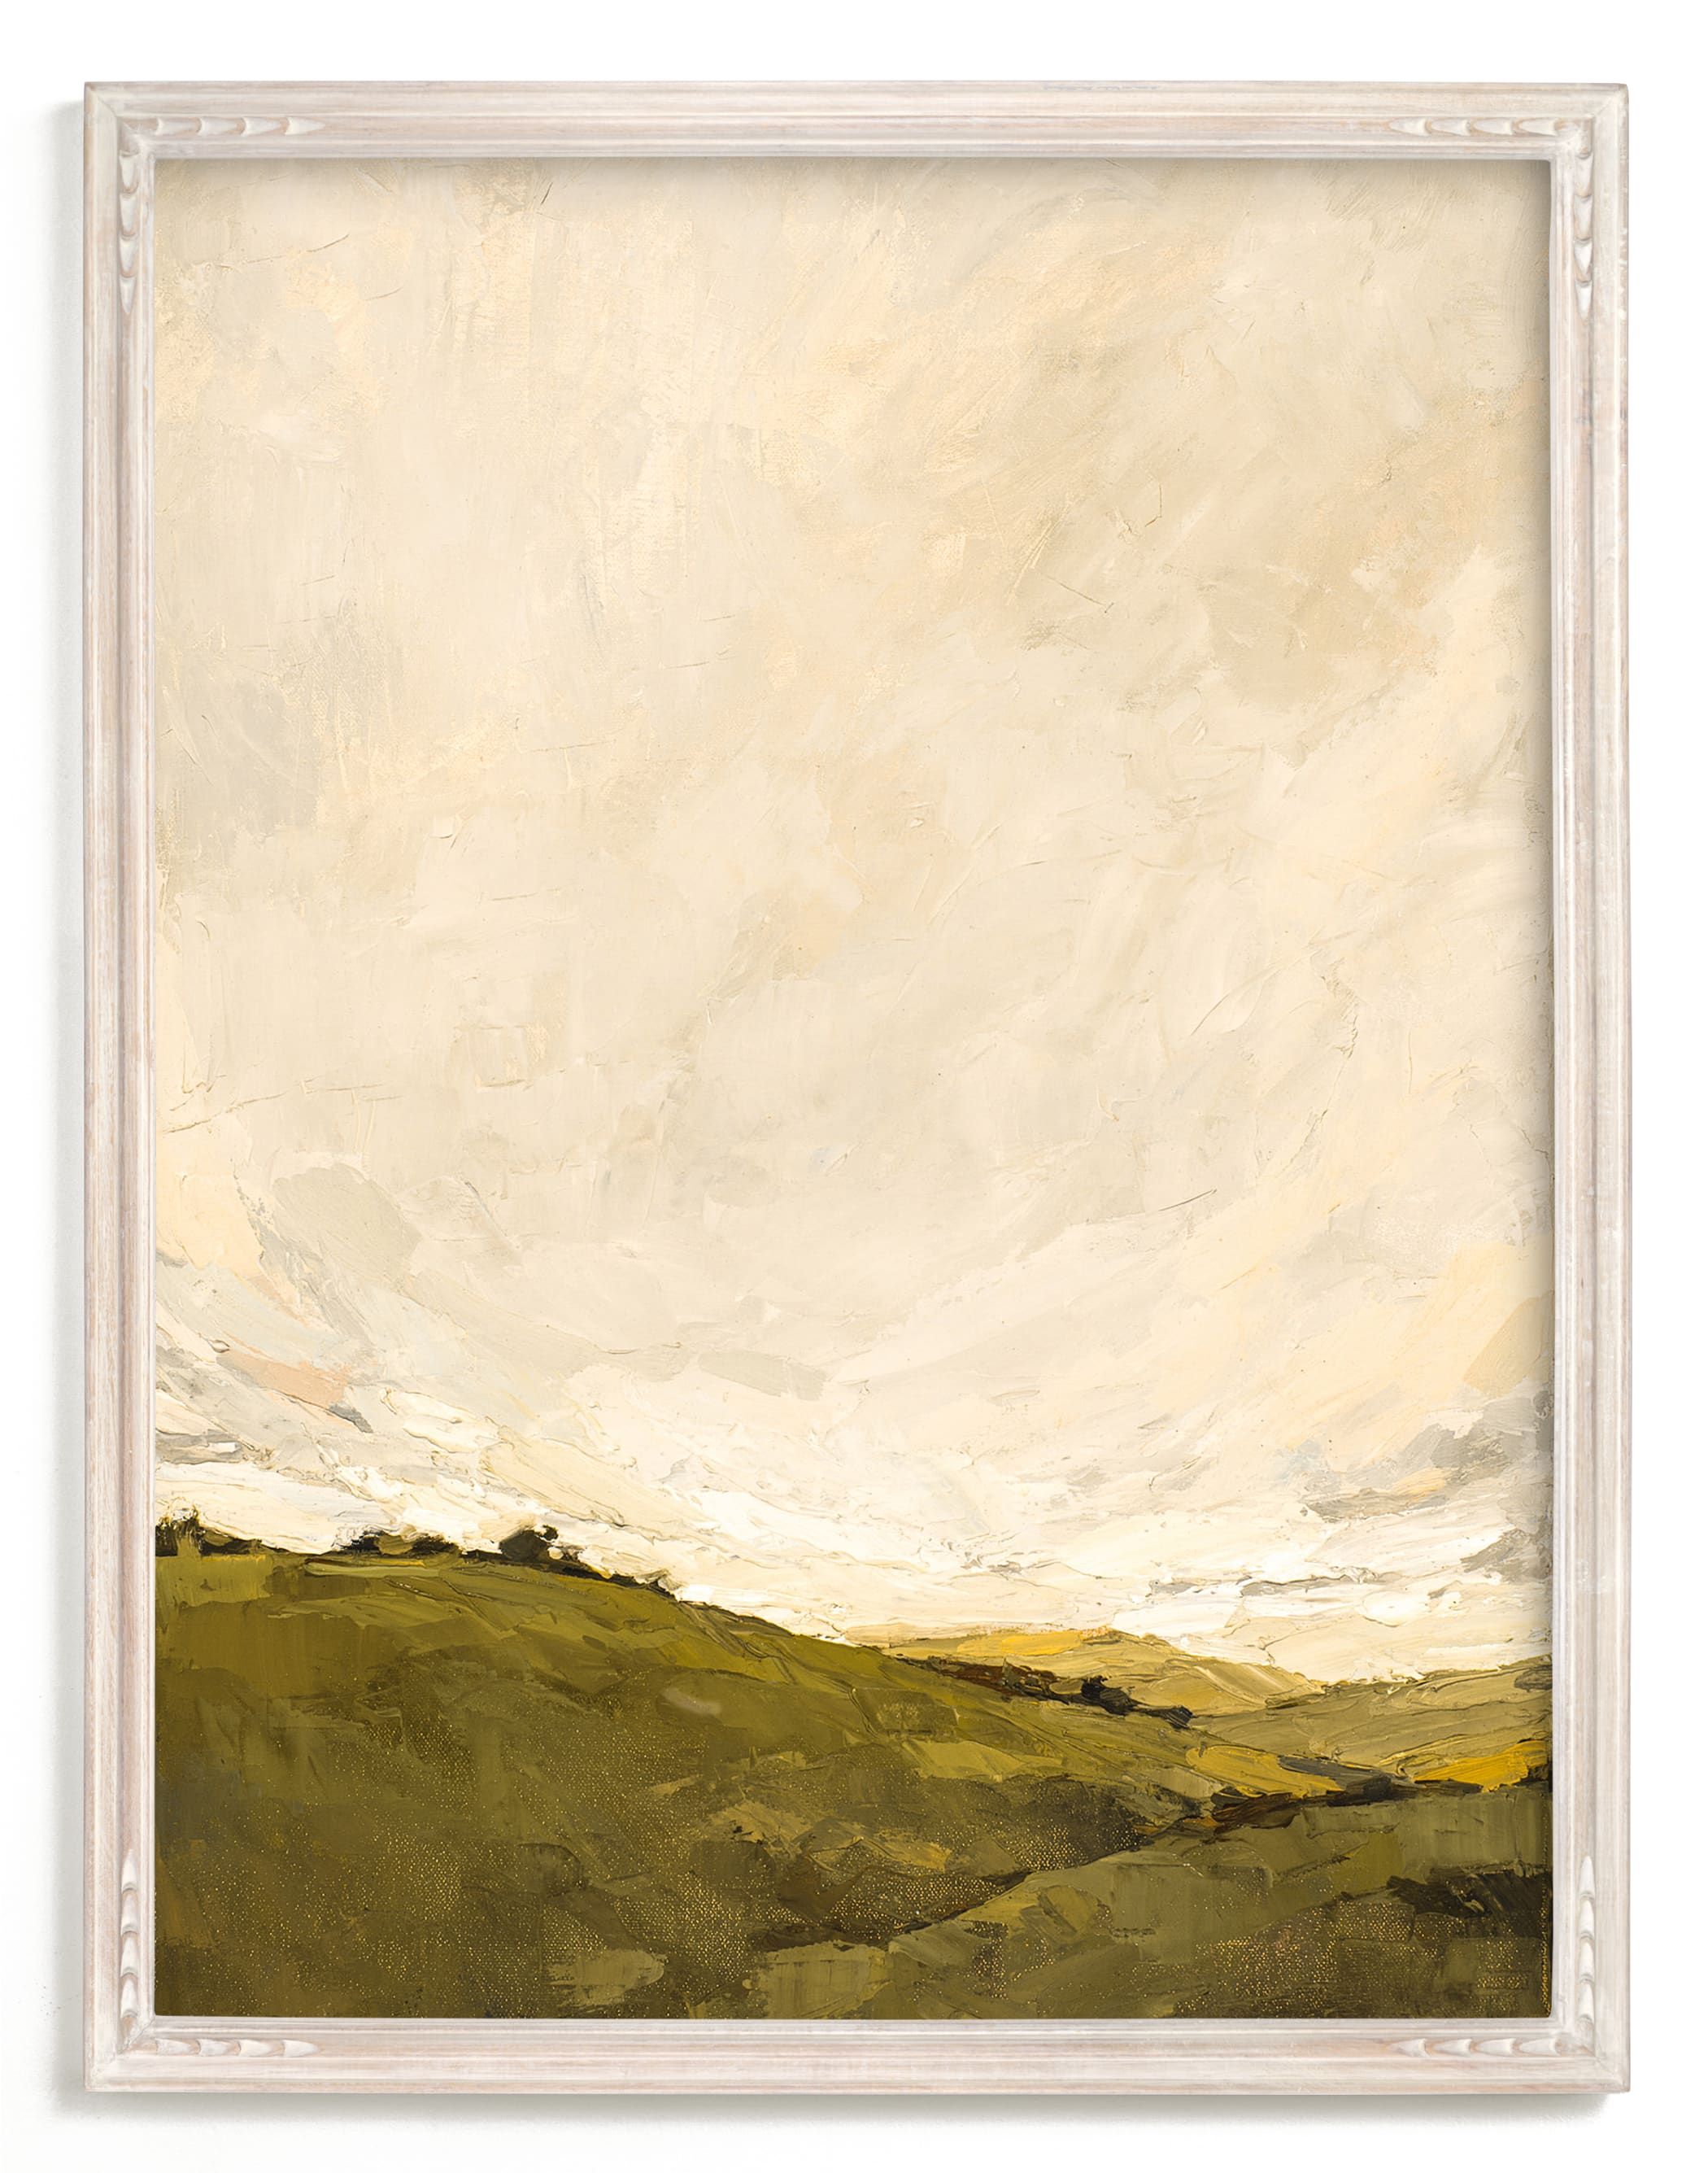 "Hills" - Painting Limited Edition Art Print by Wendy Keller. | Minted